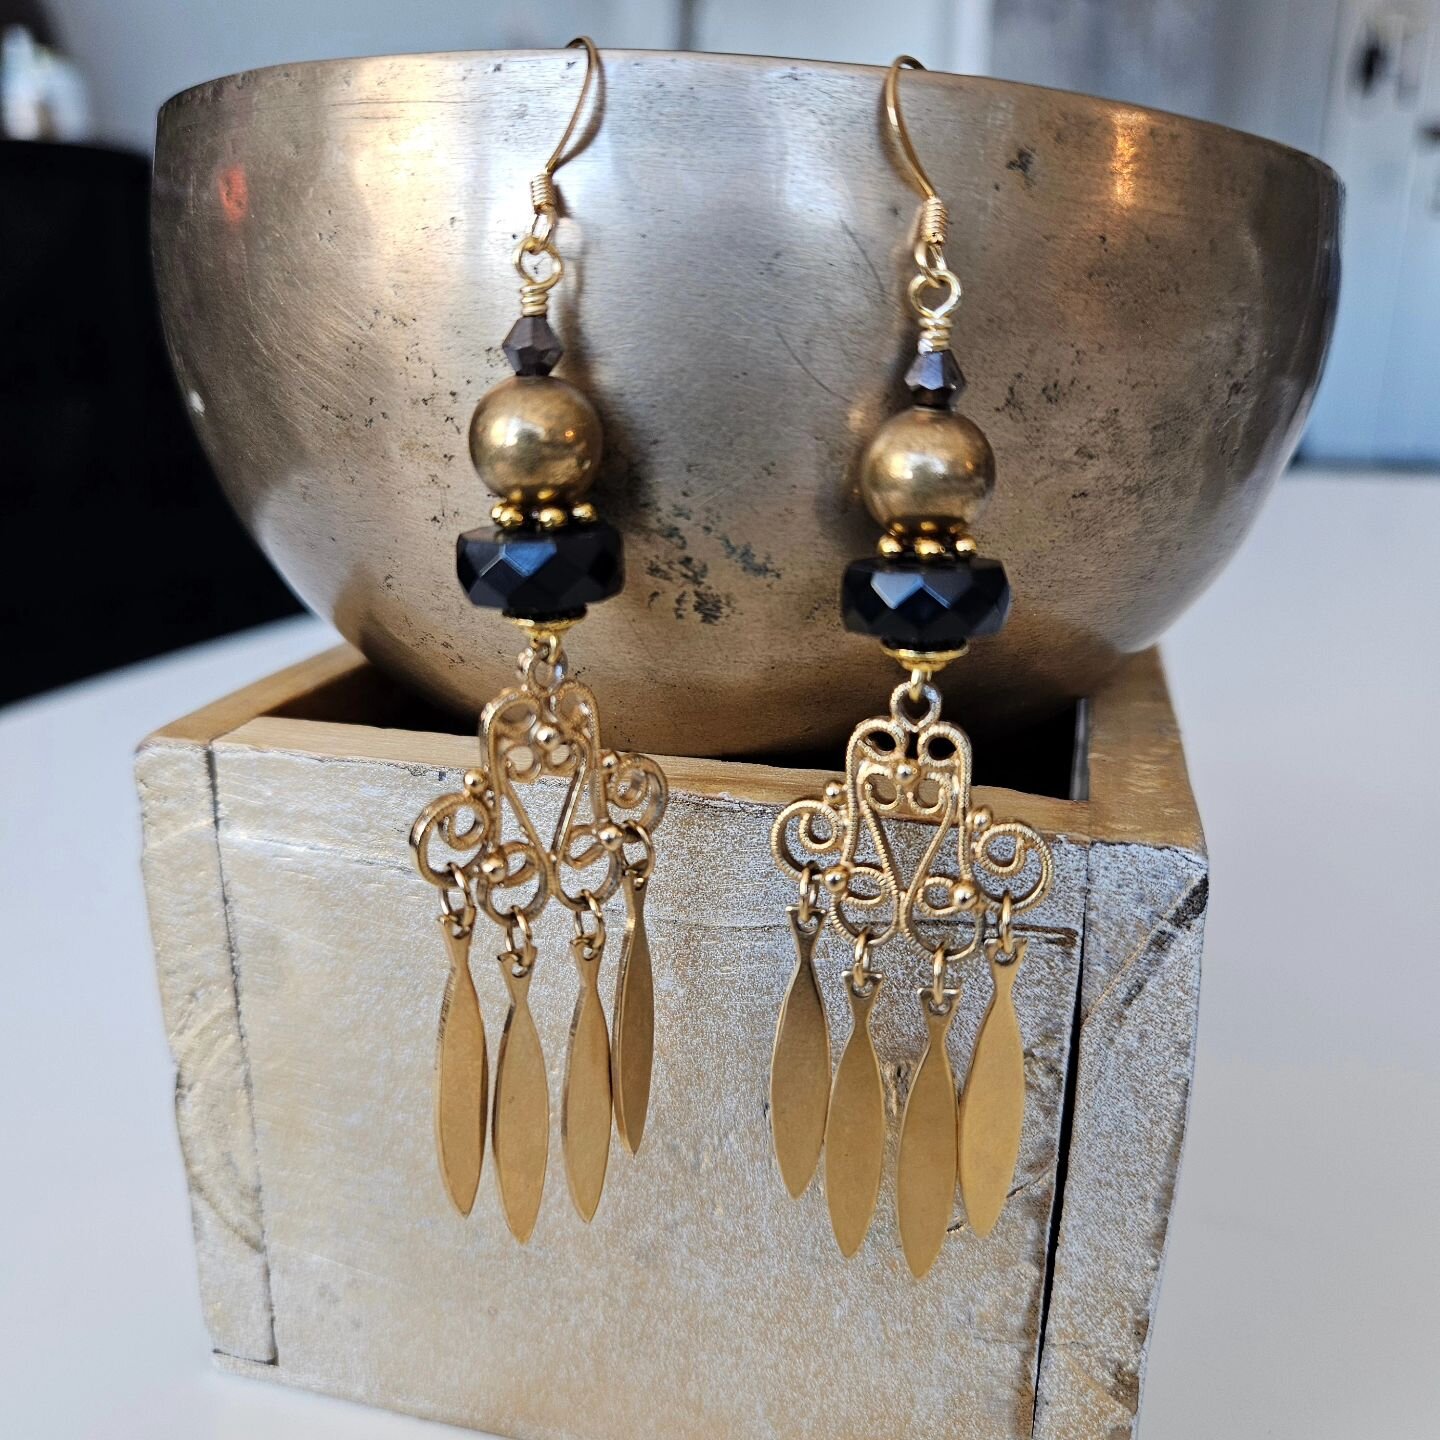 Made this pair for my hairstylist @lela__riccikapricci. She was so kind in offering to put my business cards at her station. You know I had to make her a custom pair!

Repurposed chandelier dangle earrings I enhanced with a mash up of black and gold 